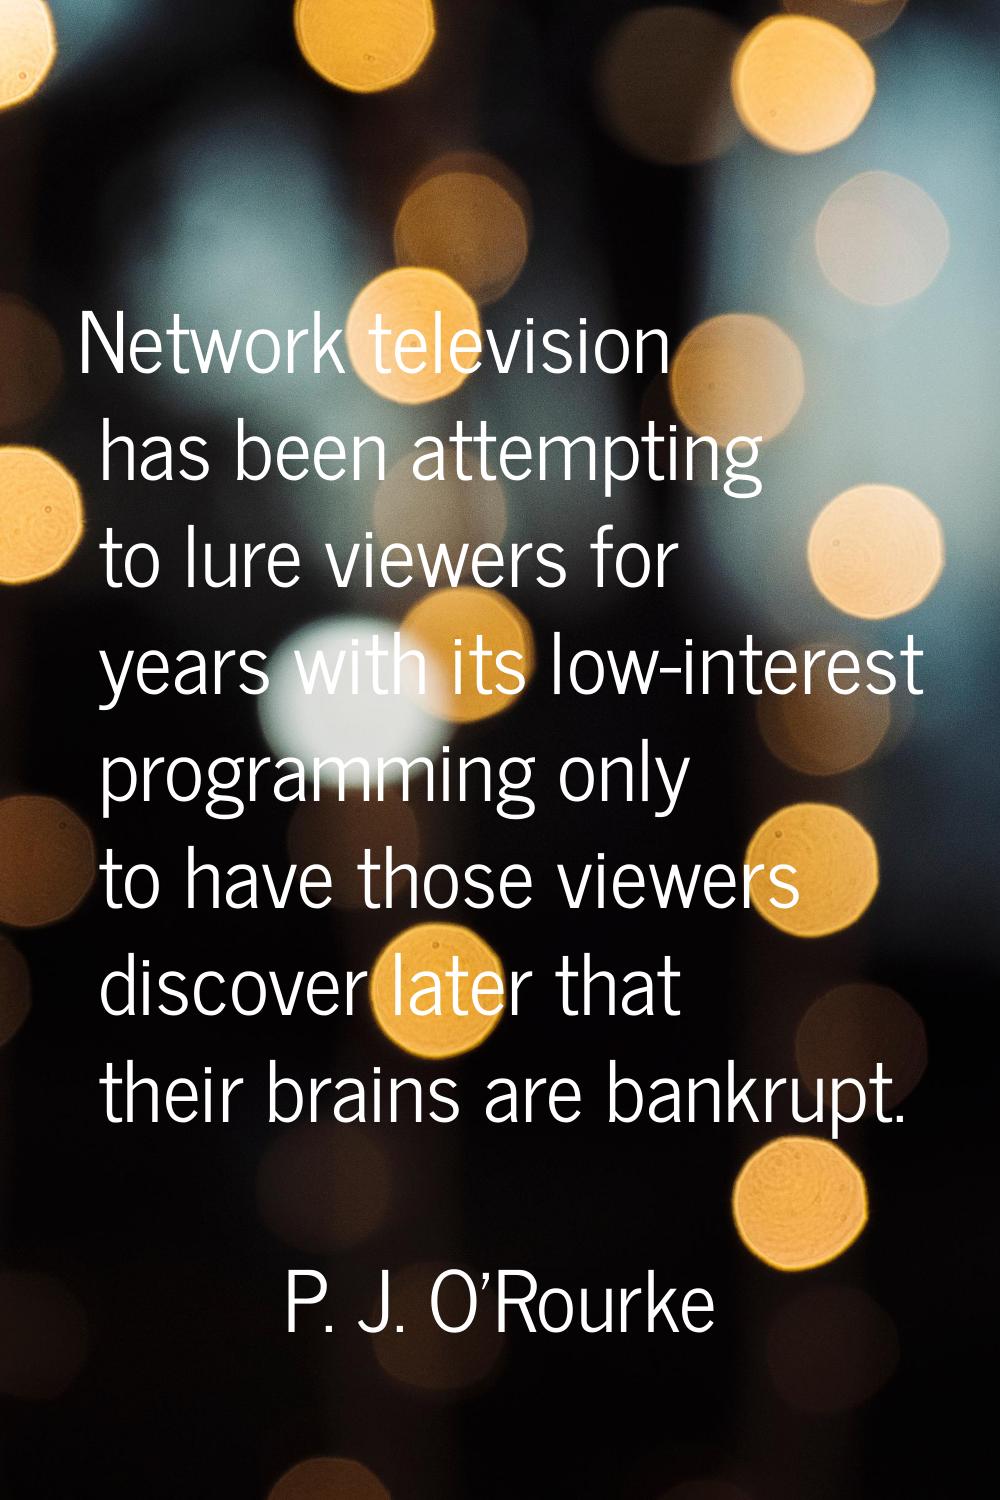 Network television has been attempting to lure viewers for years with its low-interest programming 